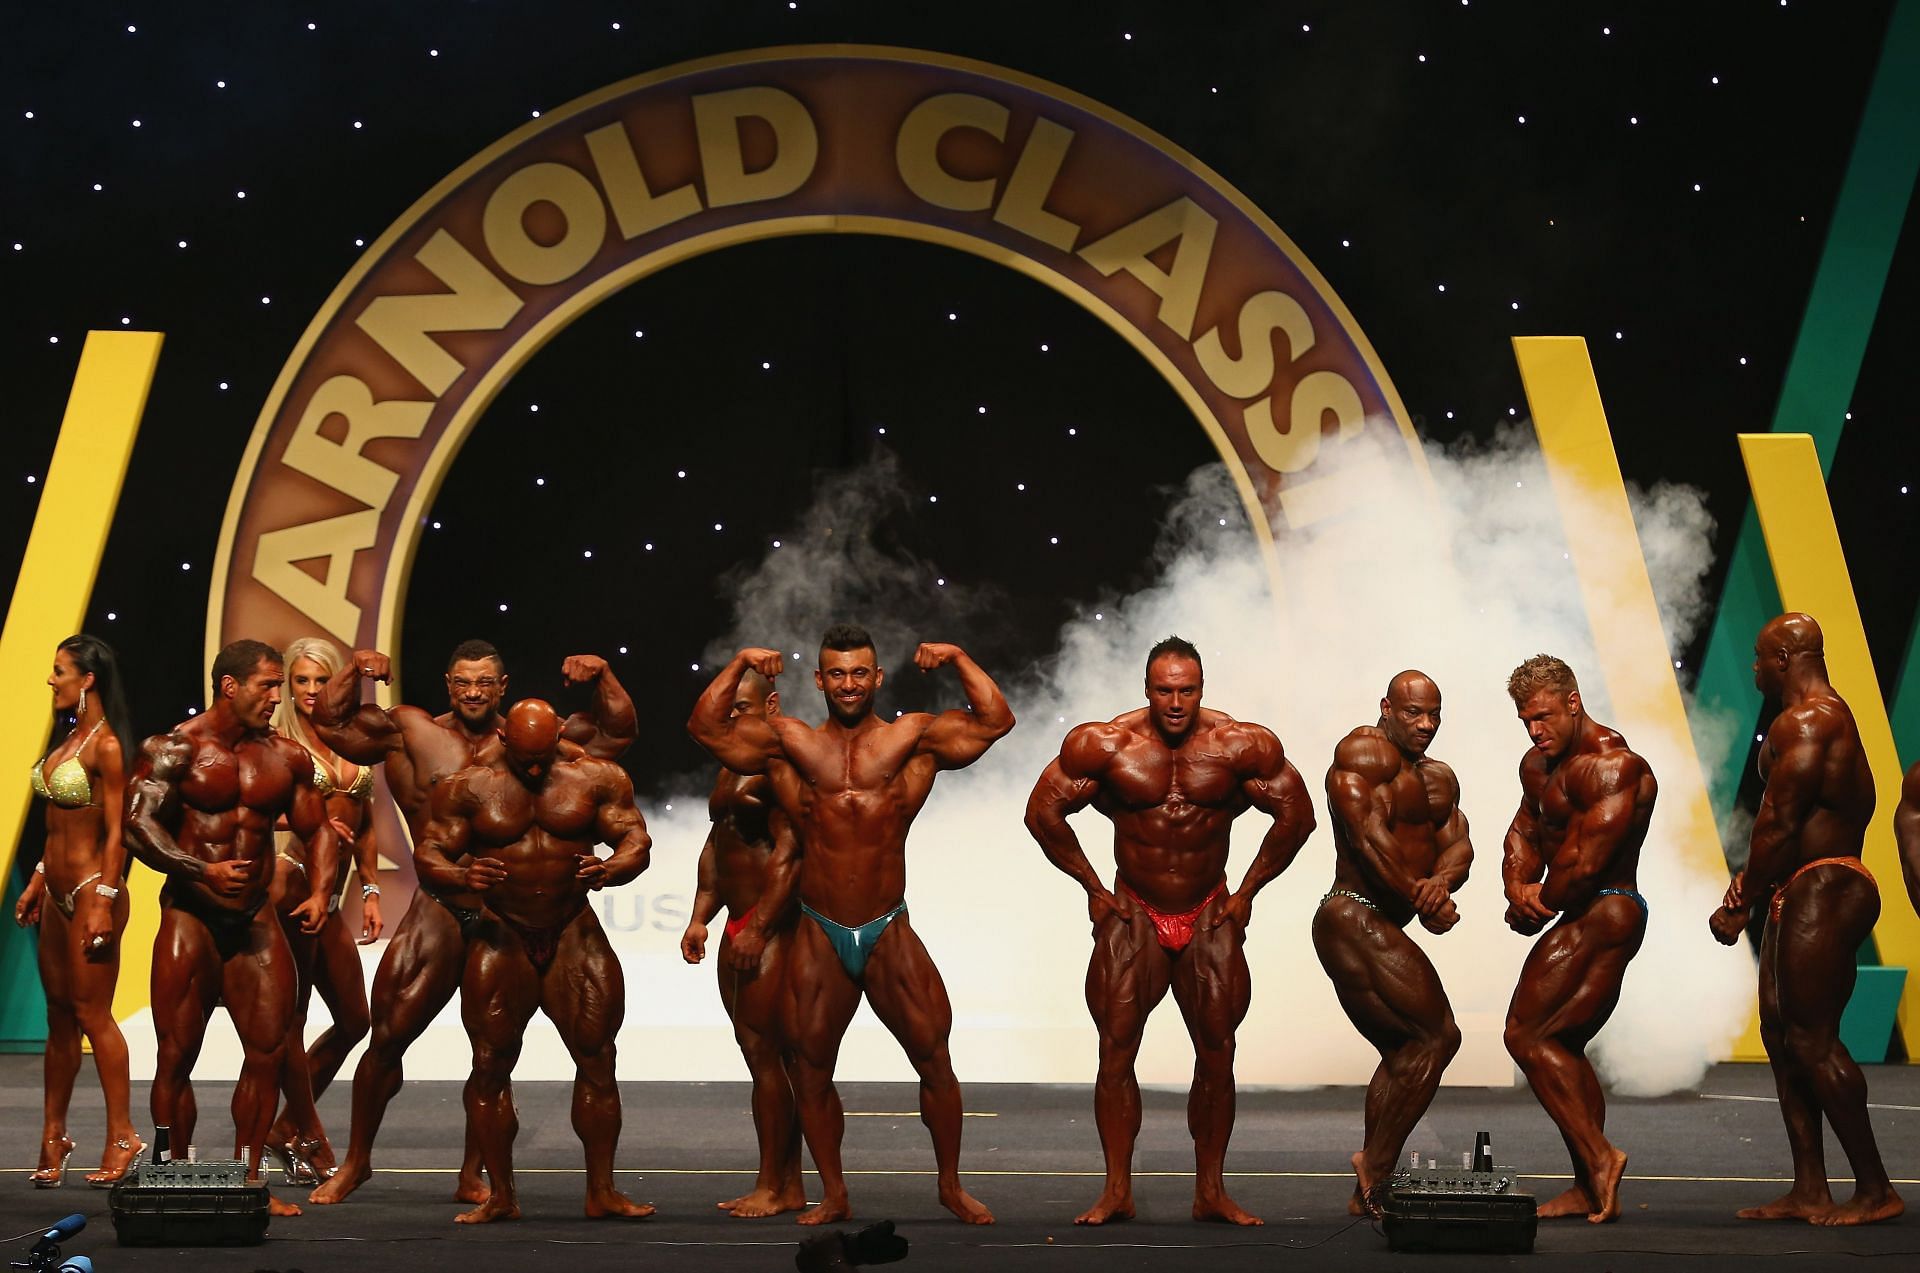 Competitors are introduced at The Arnold Classic Australia 2015 (Photo by Robert Cianflone/Getty Images)